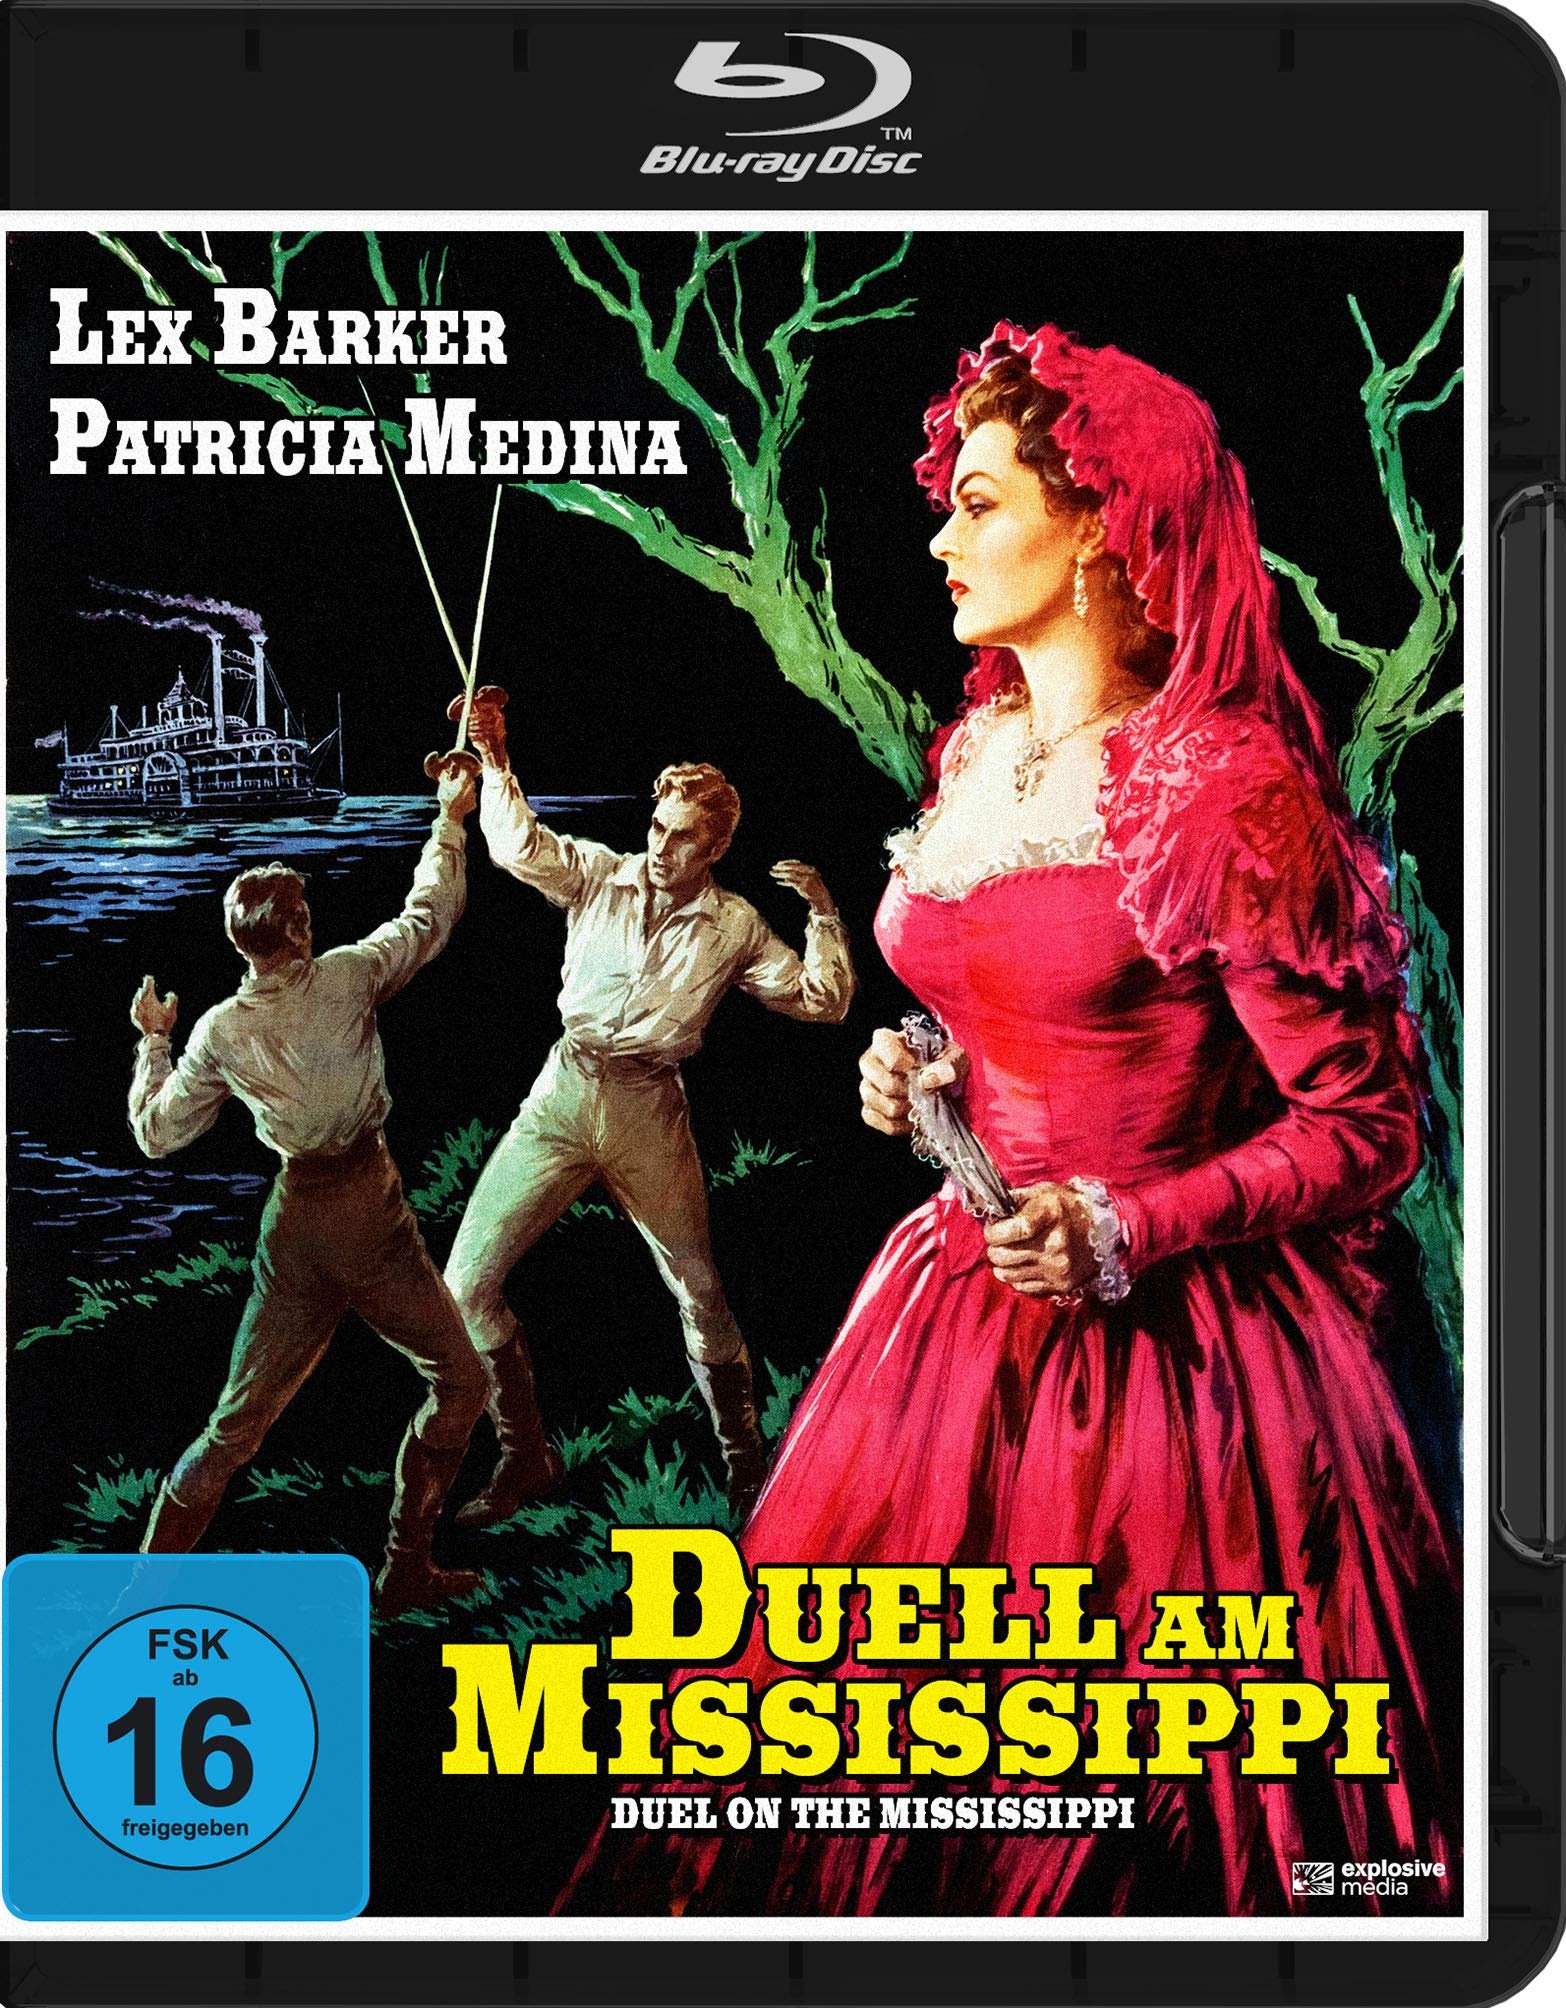 Duell am Mississippi (Duel on the Mississippi) (Blu-ray) (Neu differenzbesteuert)